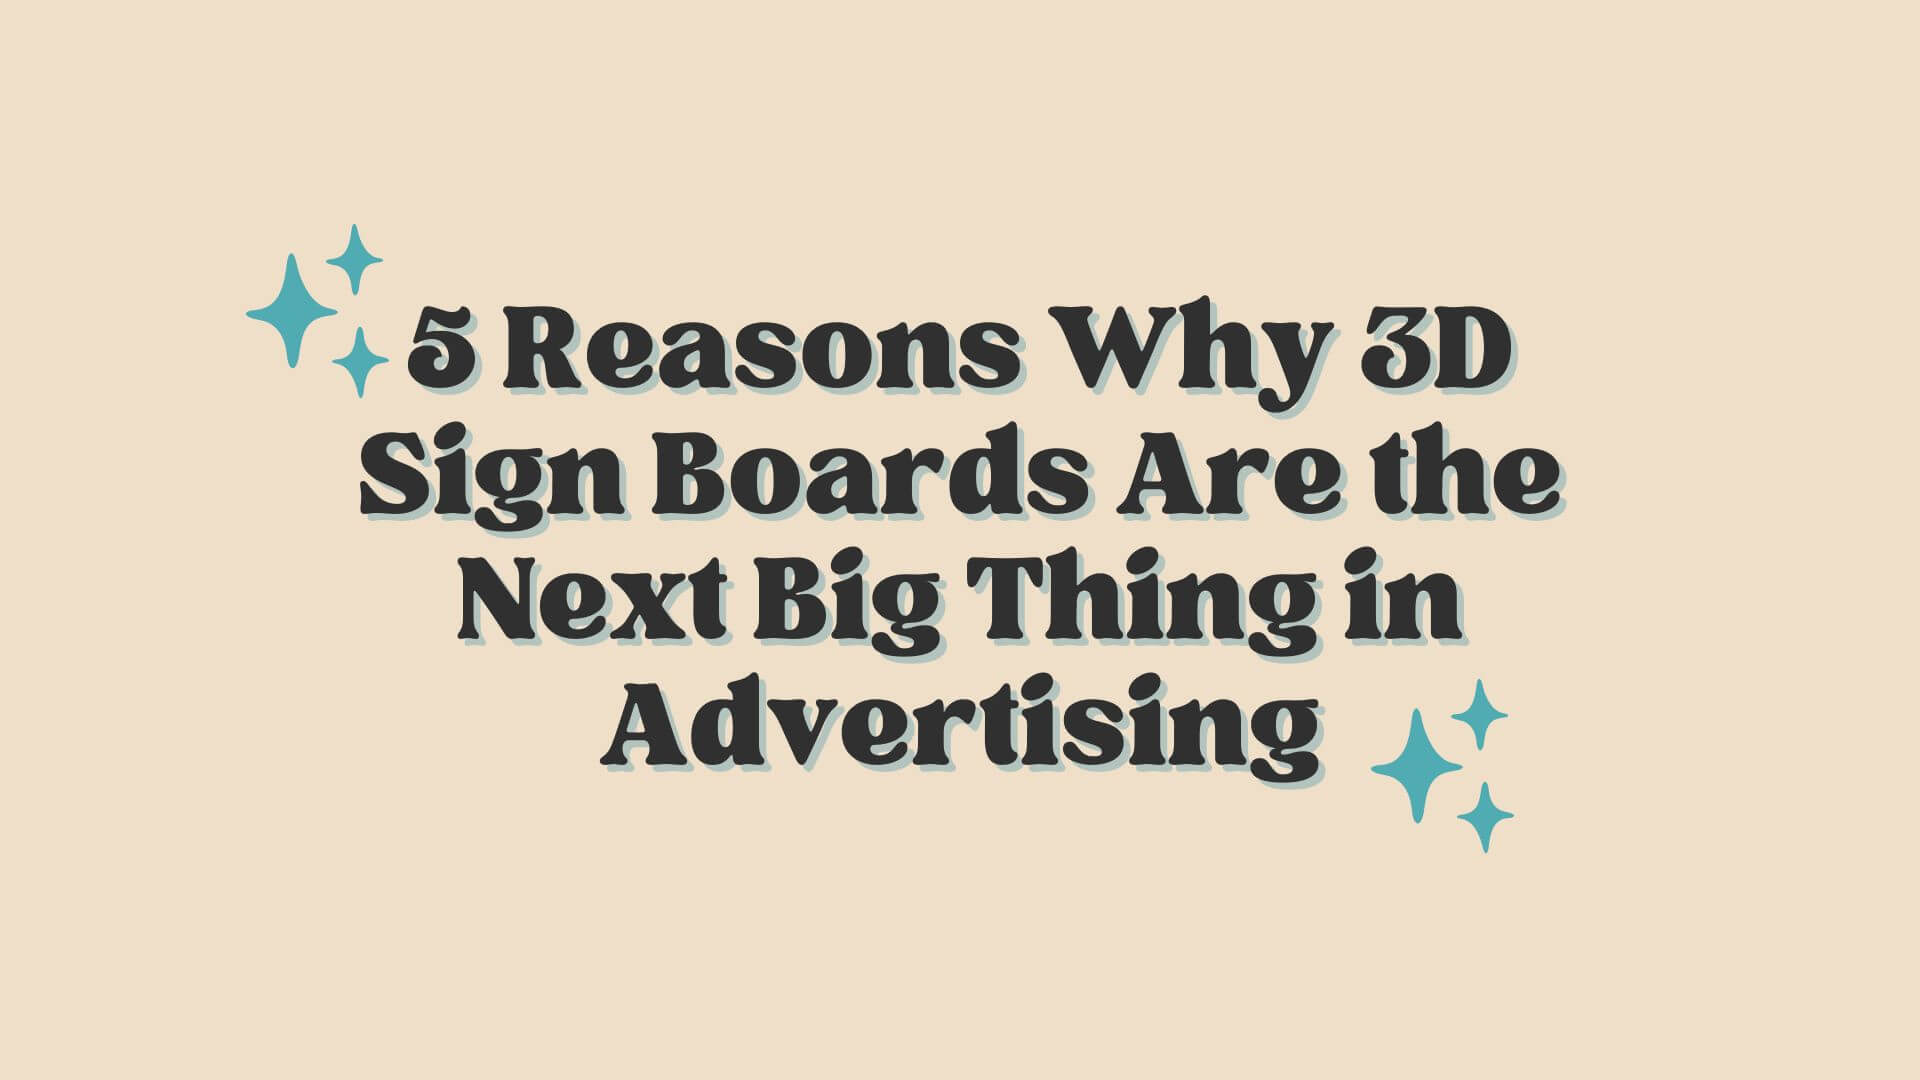 5 Reasons Why 3D Sign Boards Are the Next Big Thing in Advertising